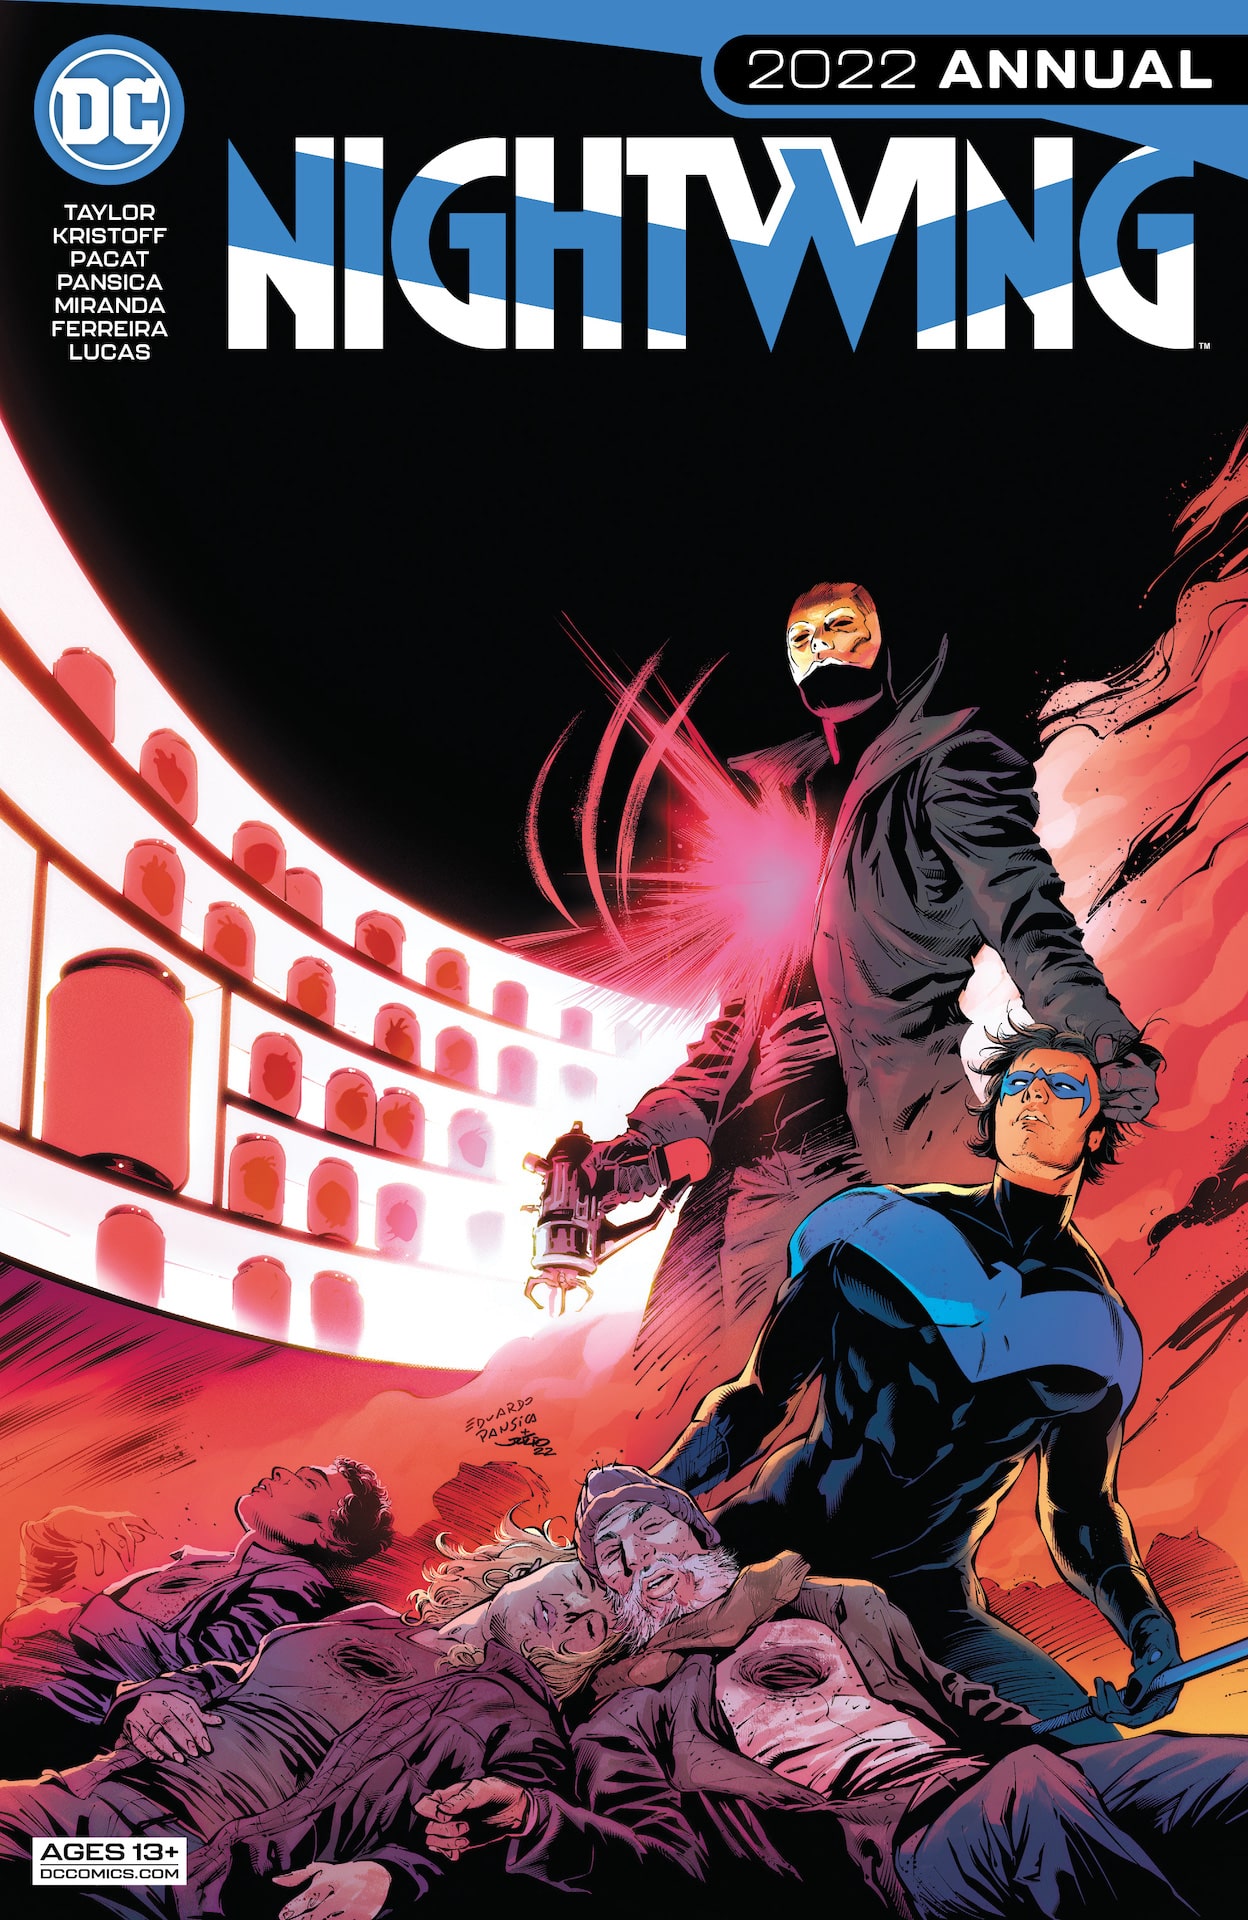 DC Preview: Nightwing 2022 Annual #1